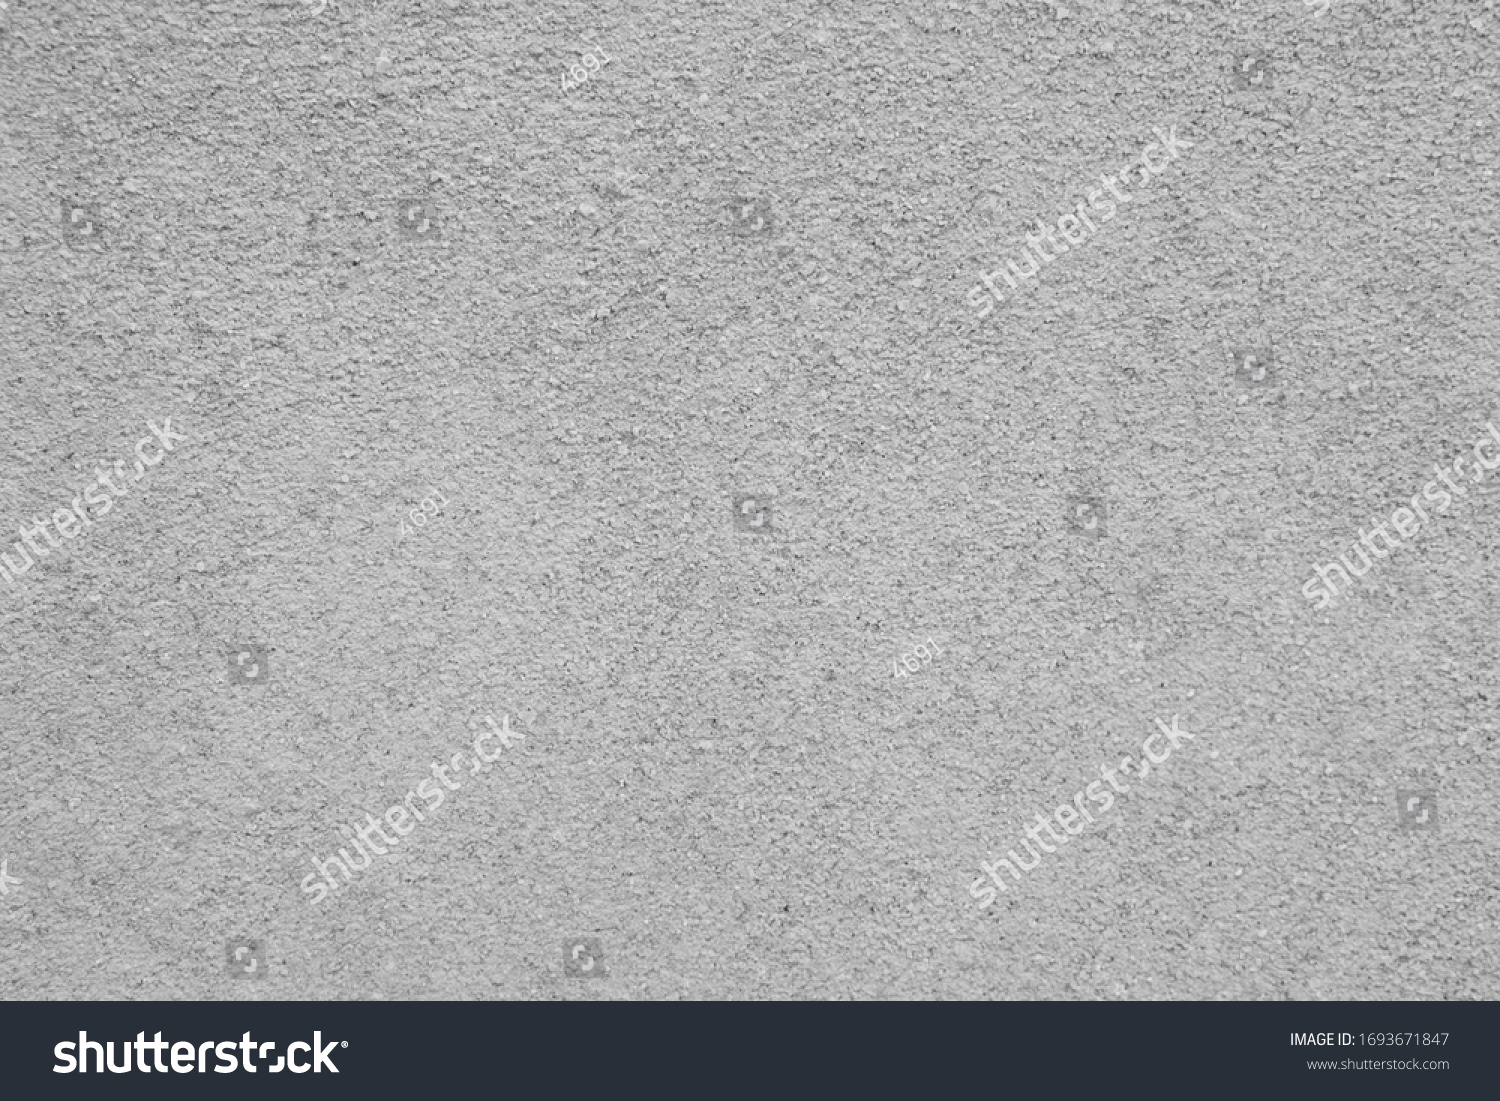 grunge  gray concrete cracked walll   abstract texture background #1693671847